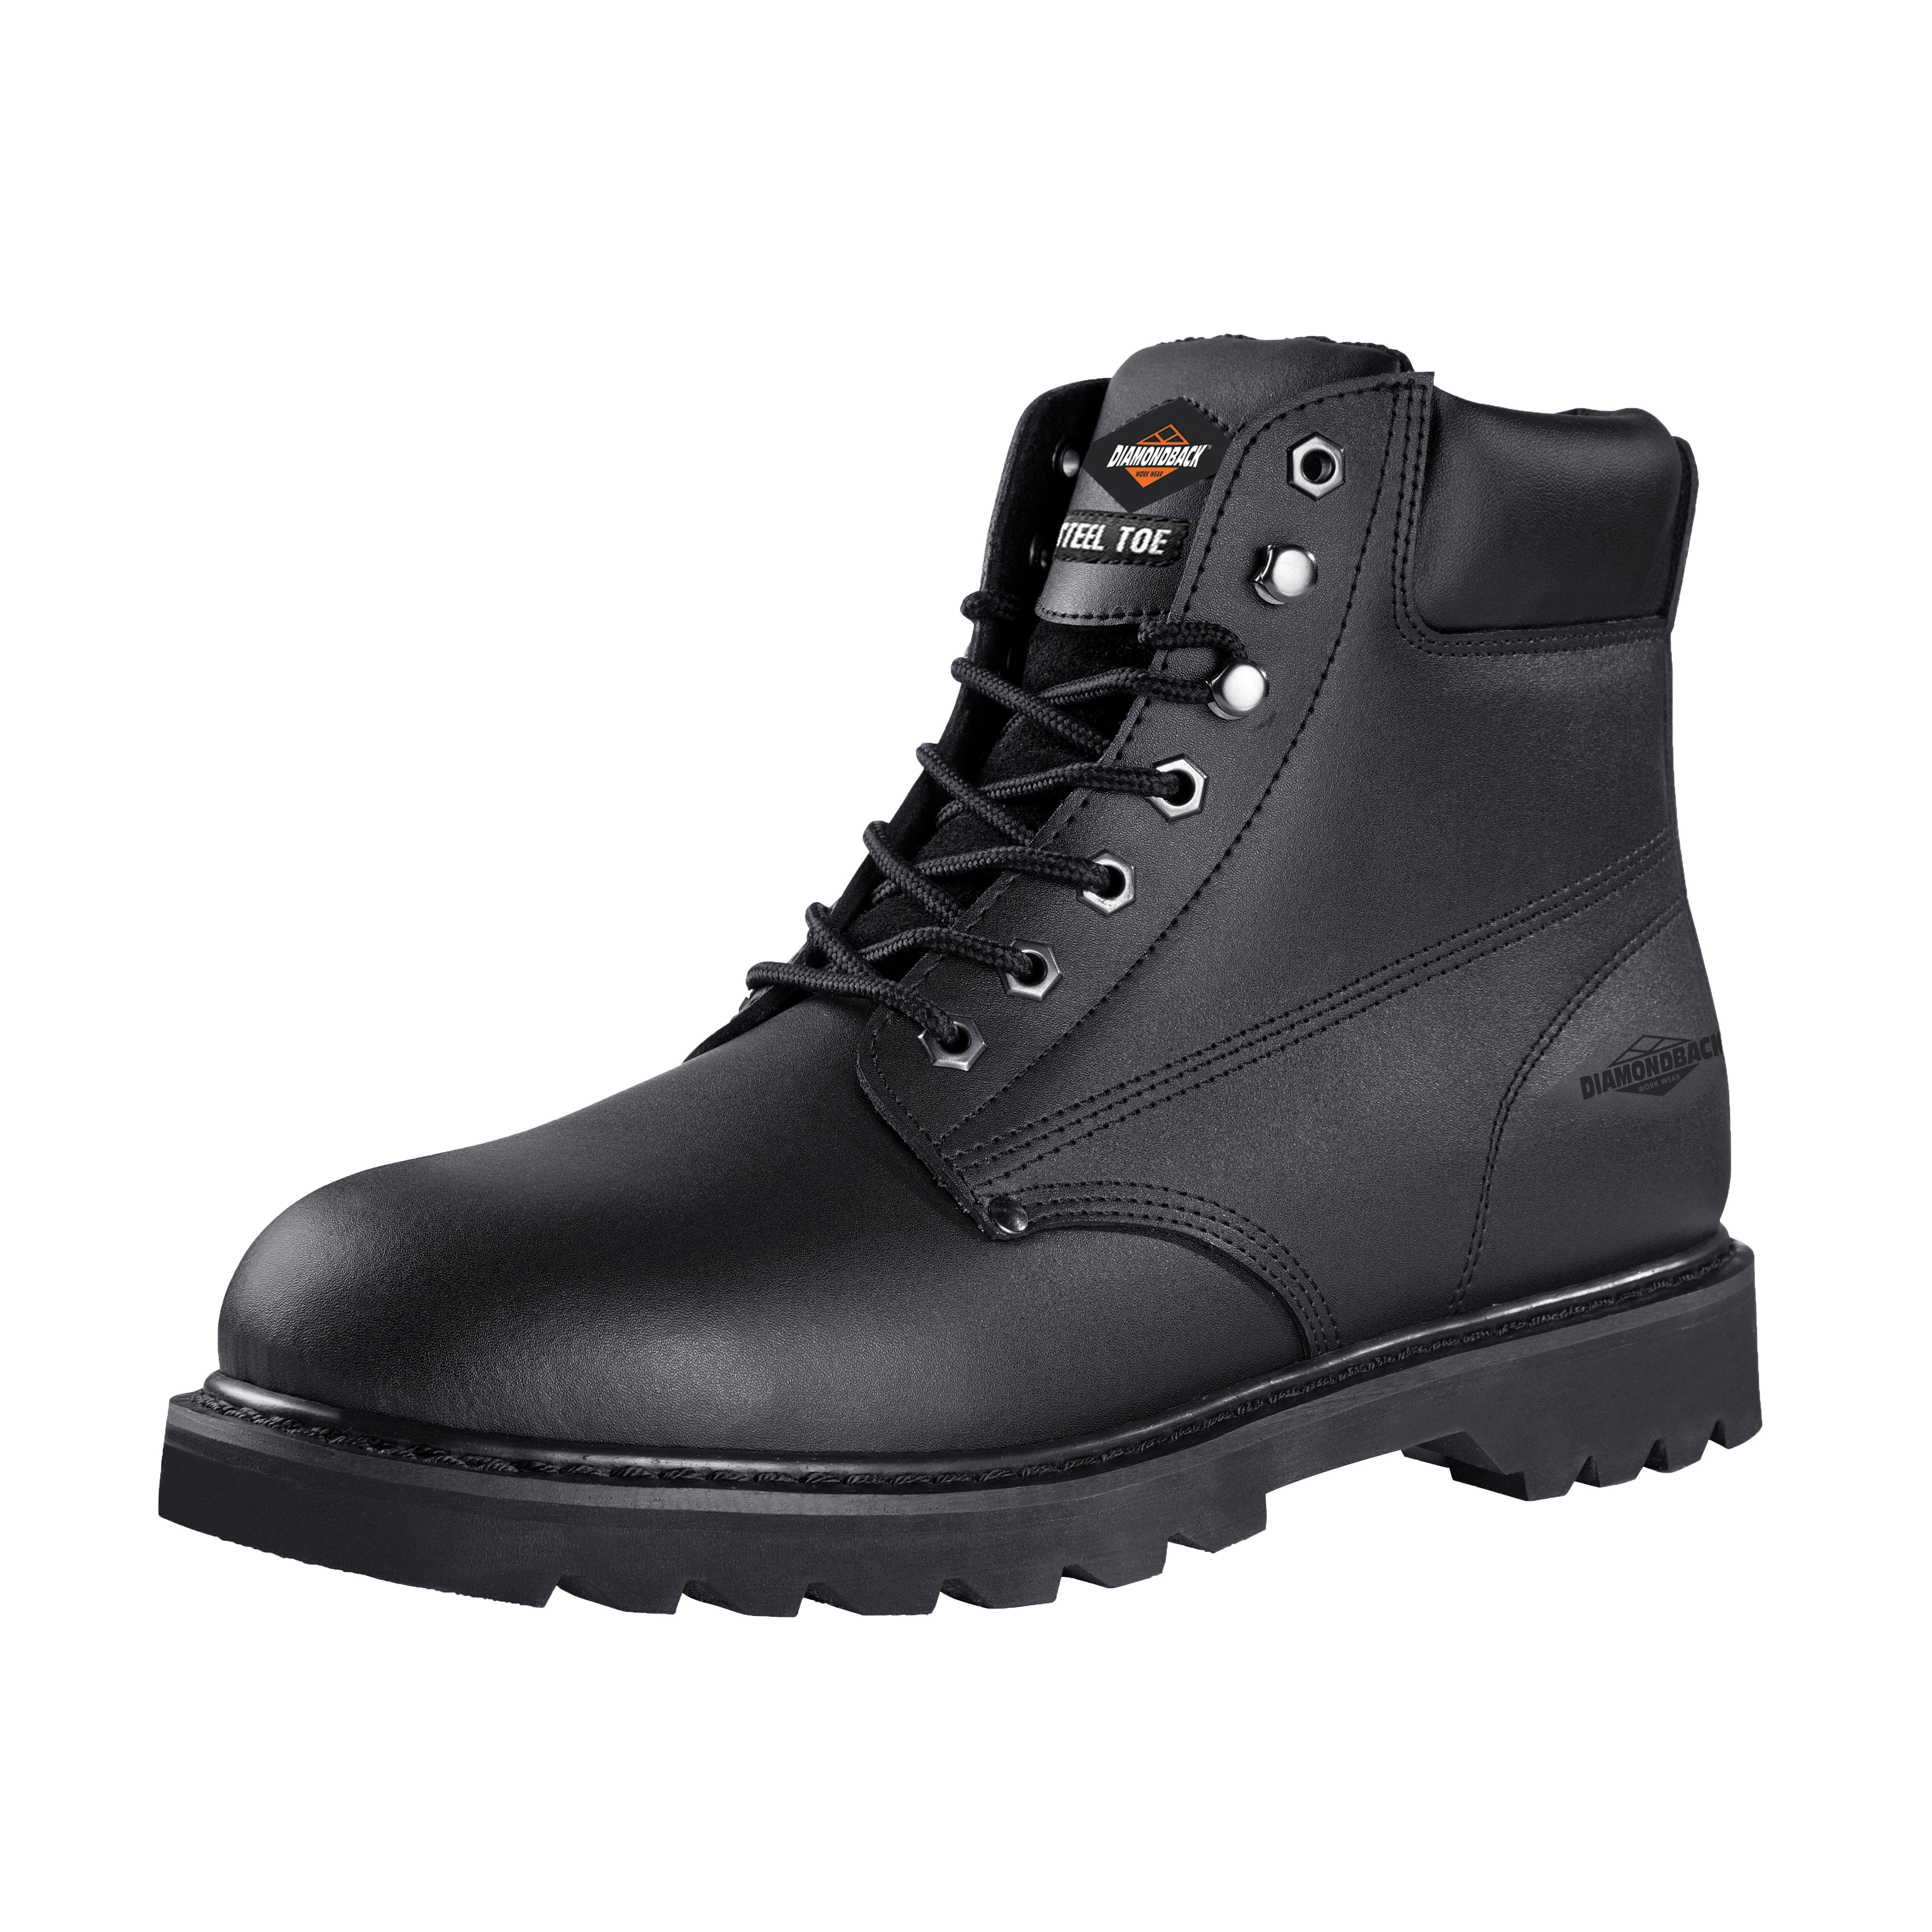 655SS-9 Work Boots, 9, Medium Shoe Last W, Black, Leather Upper, Lace-Up Boots Closure, With Lining